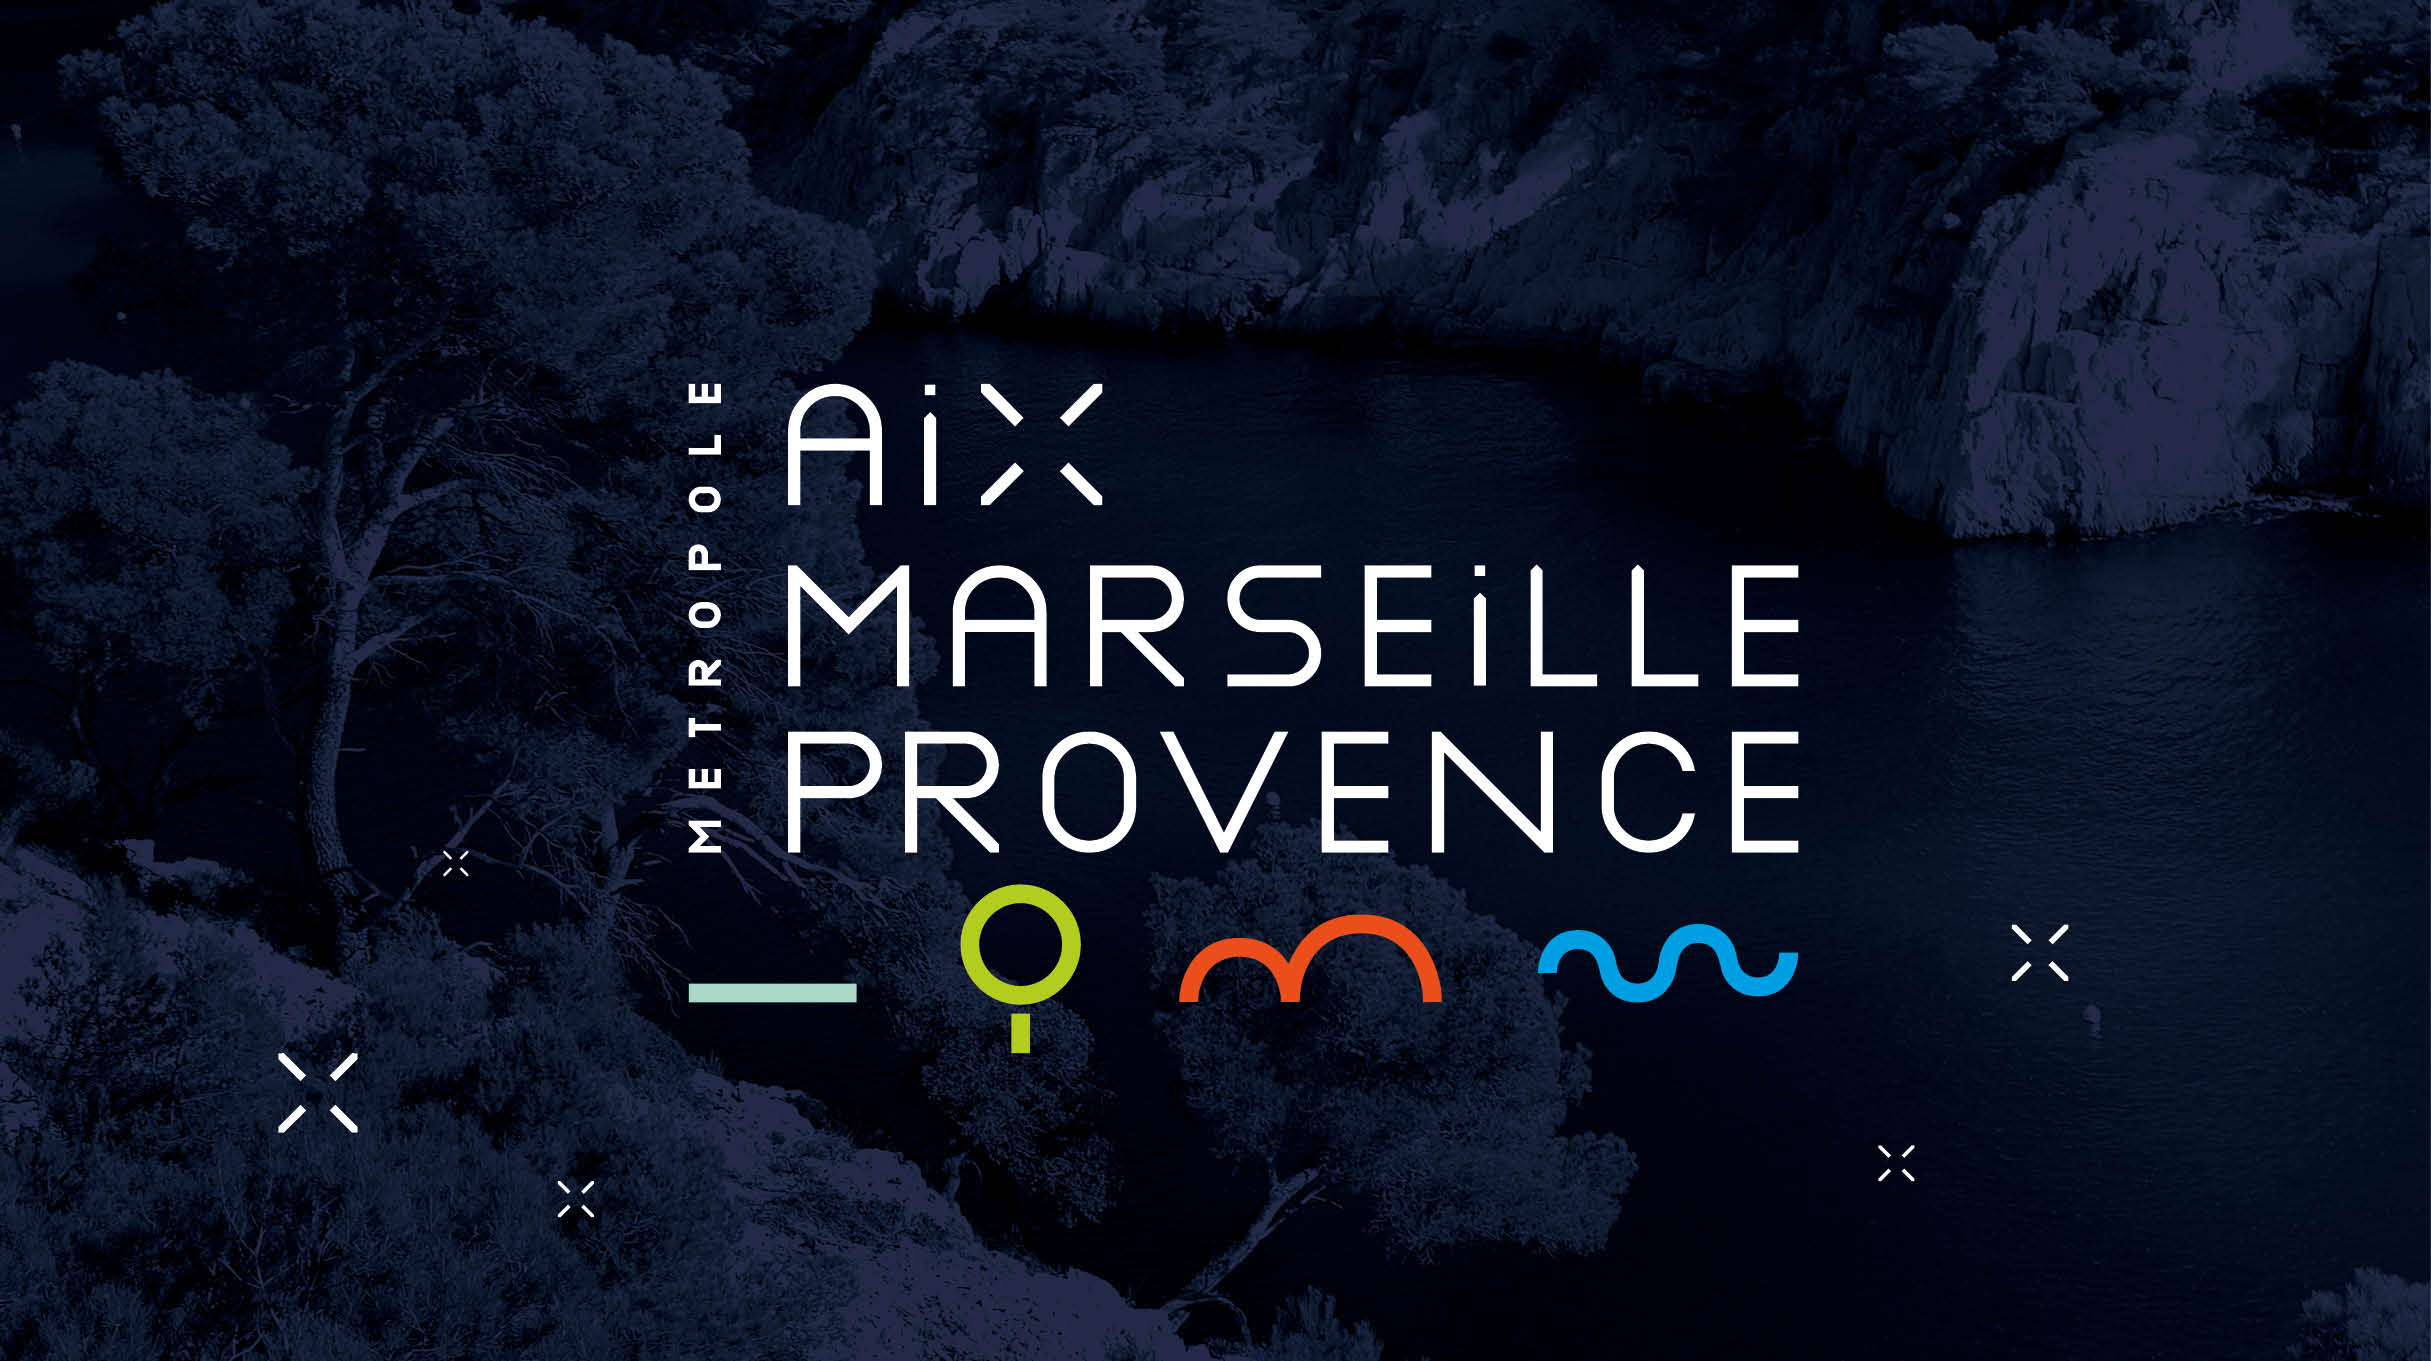 reference_metropole_aix_marseille_provence_2